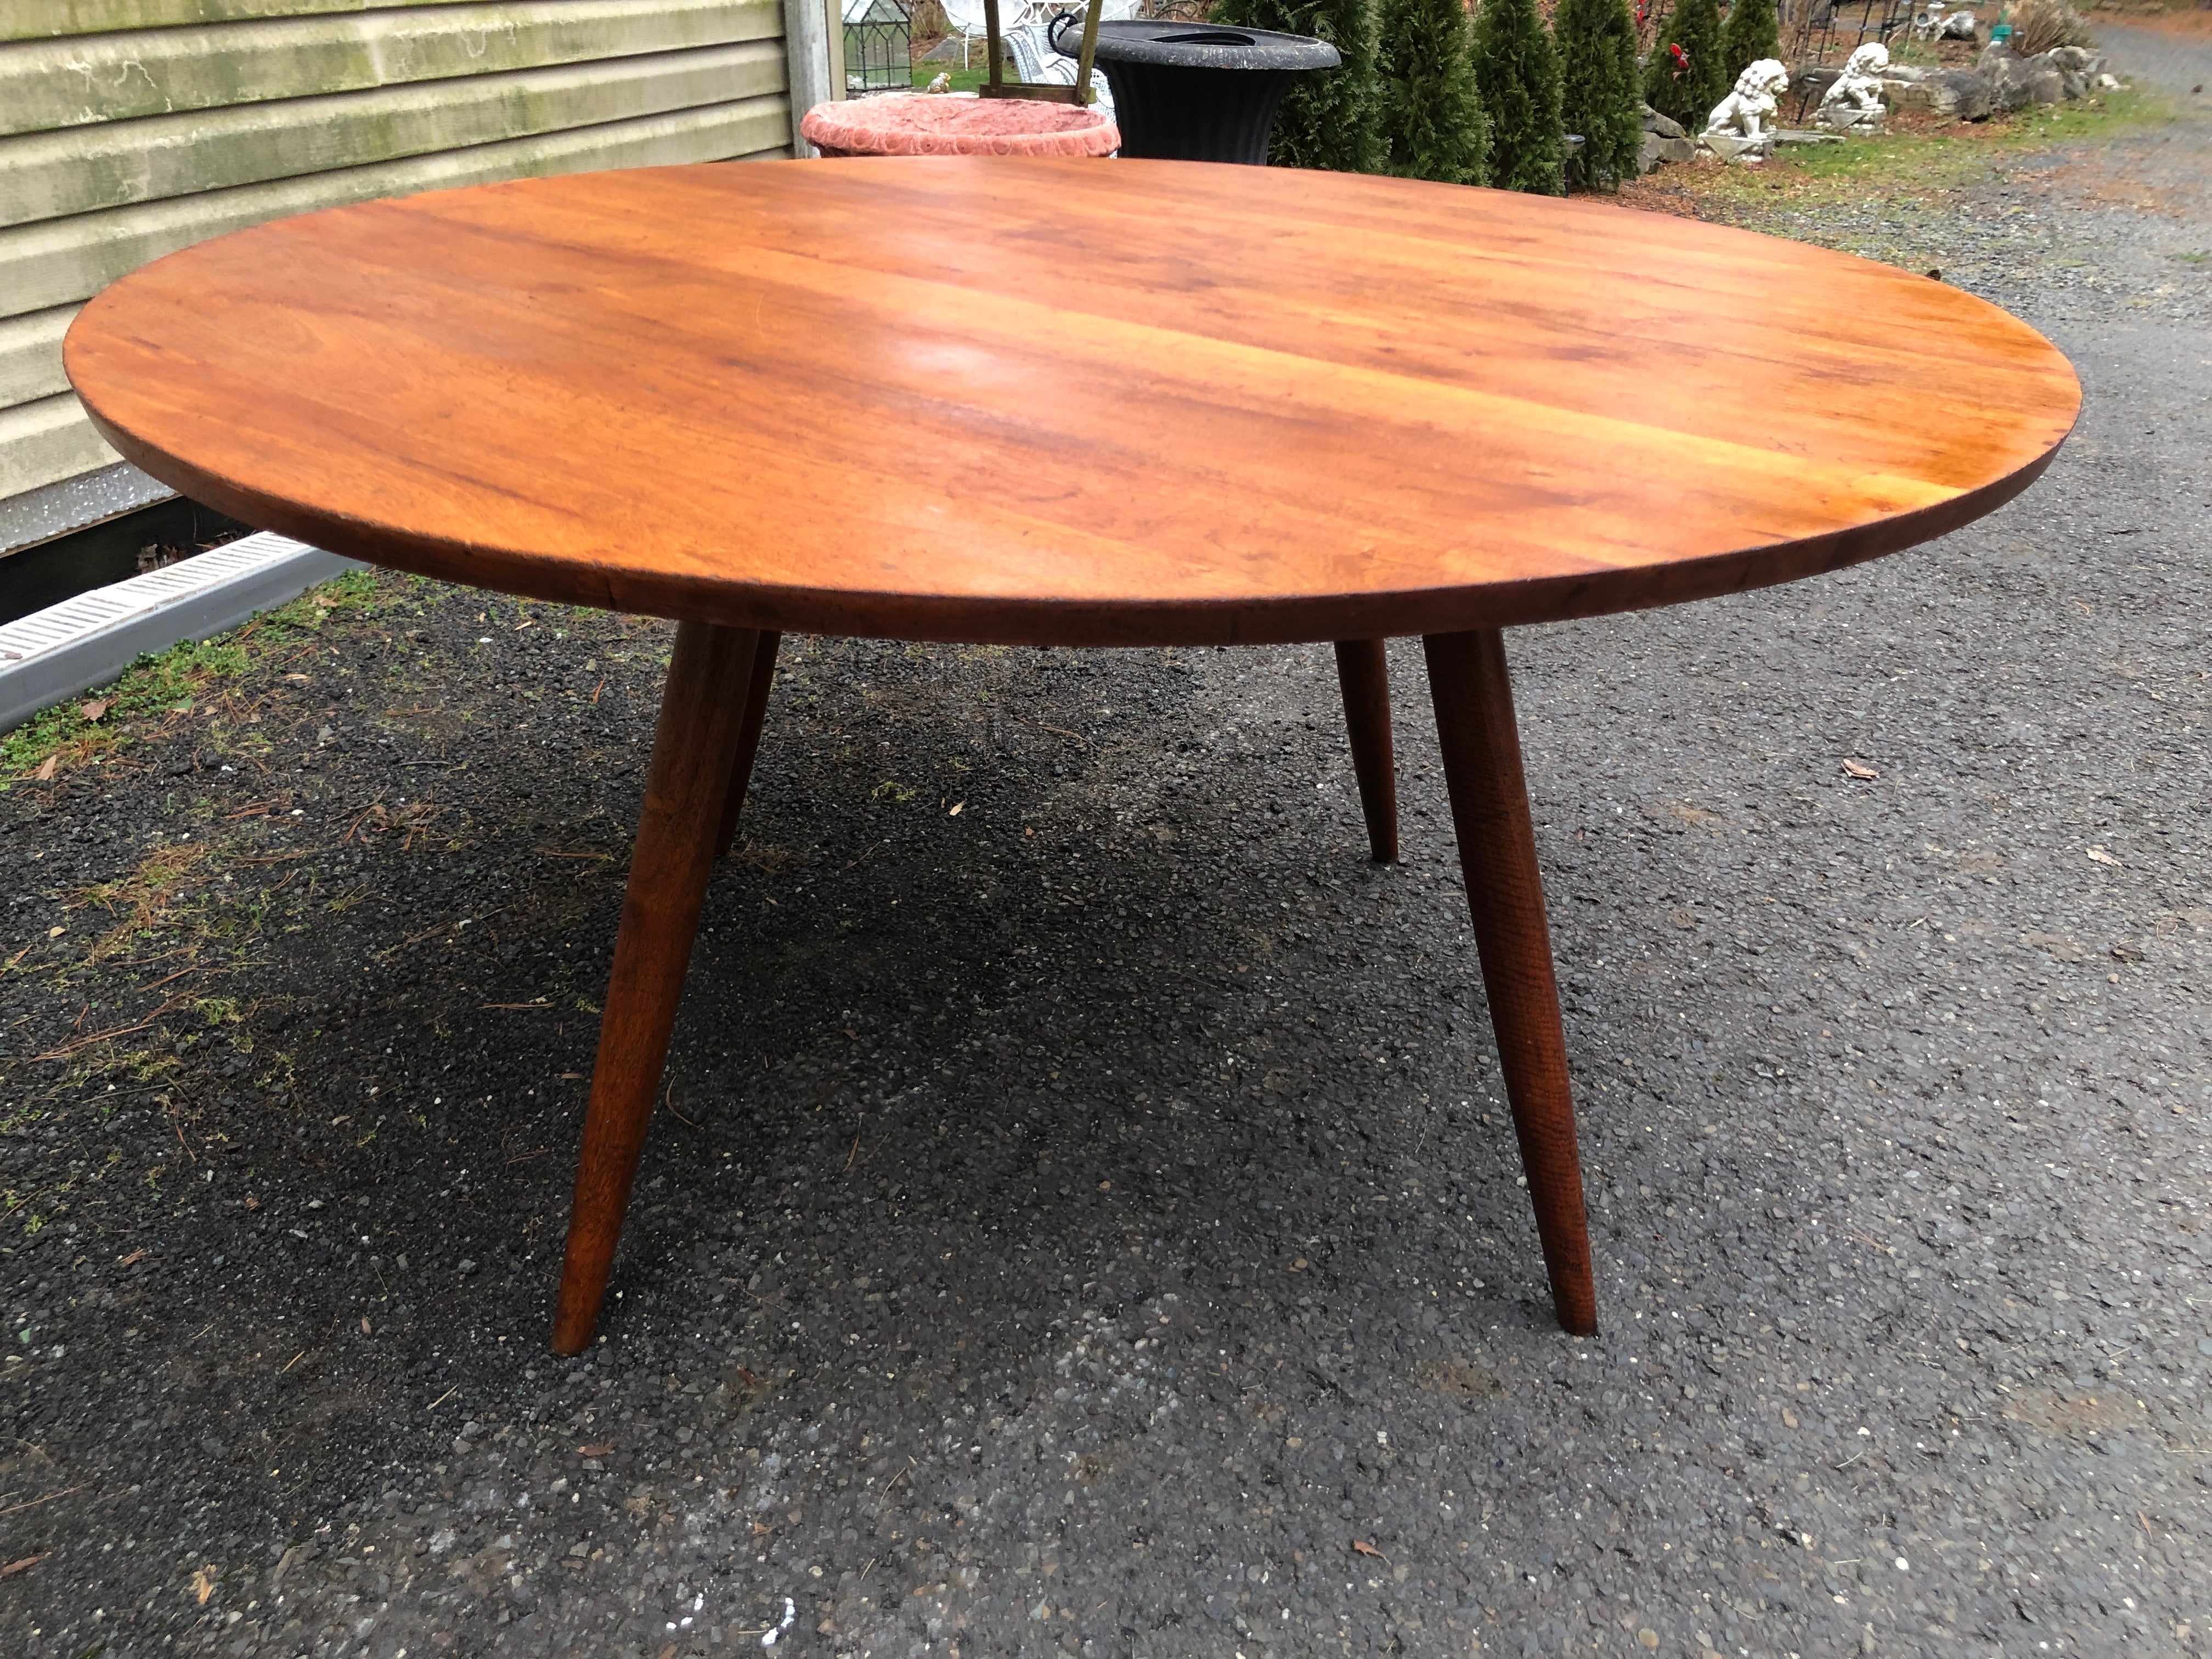 Amazing Black Walnut dining table from American midcentury craftsman George Nakashima. This wonderful table features four splayed tapered dowel legs which support a large round table top.  The table top does show some light wear with minor scratches